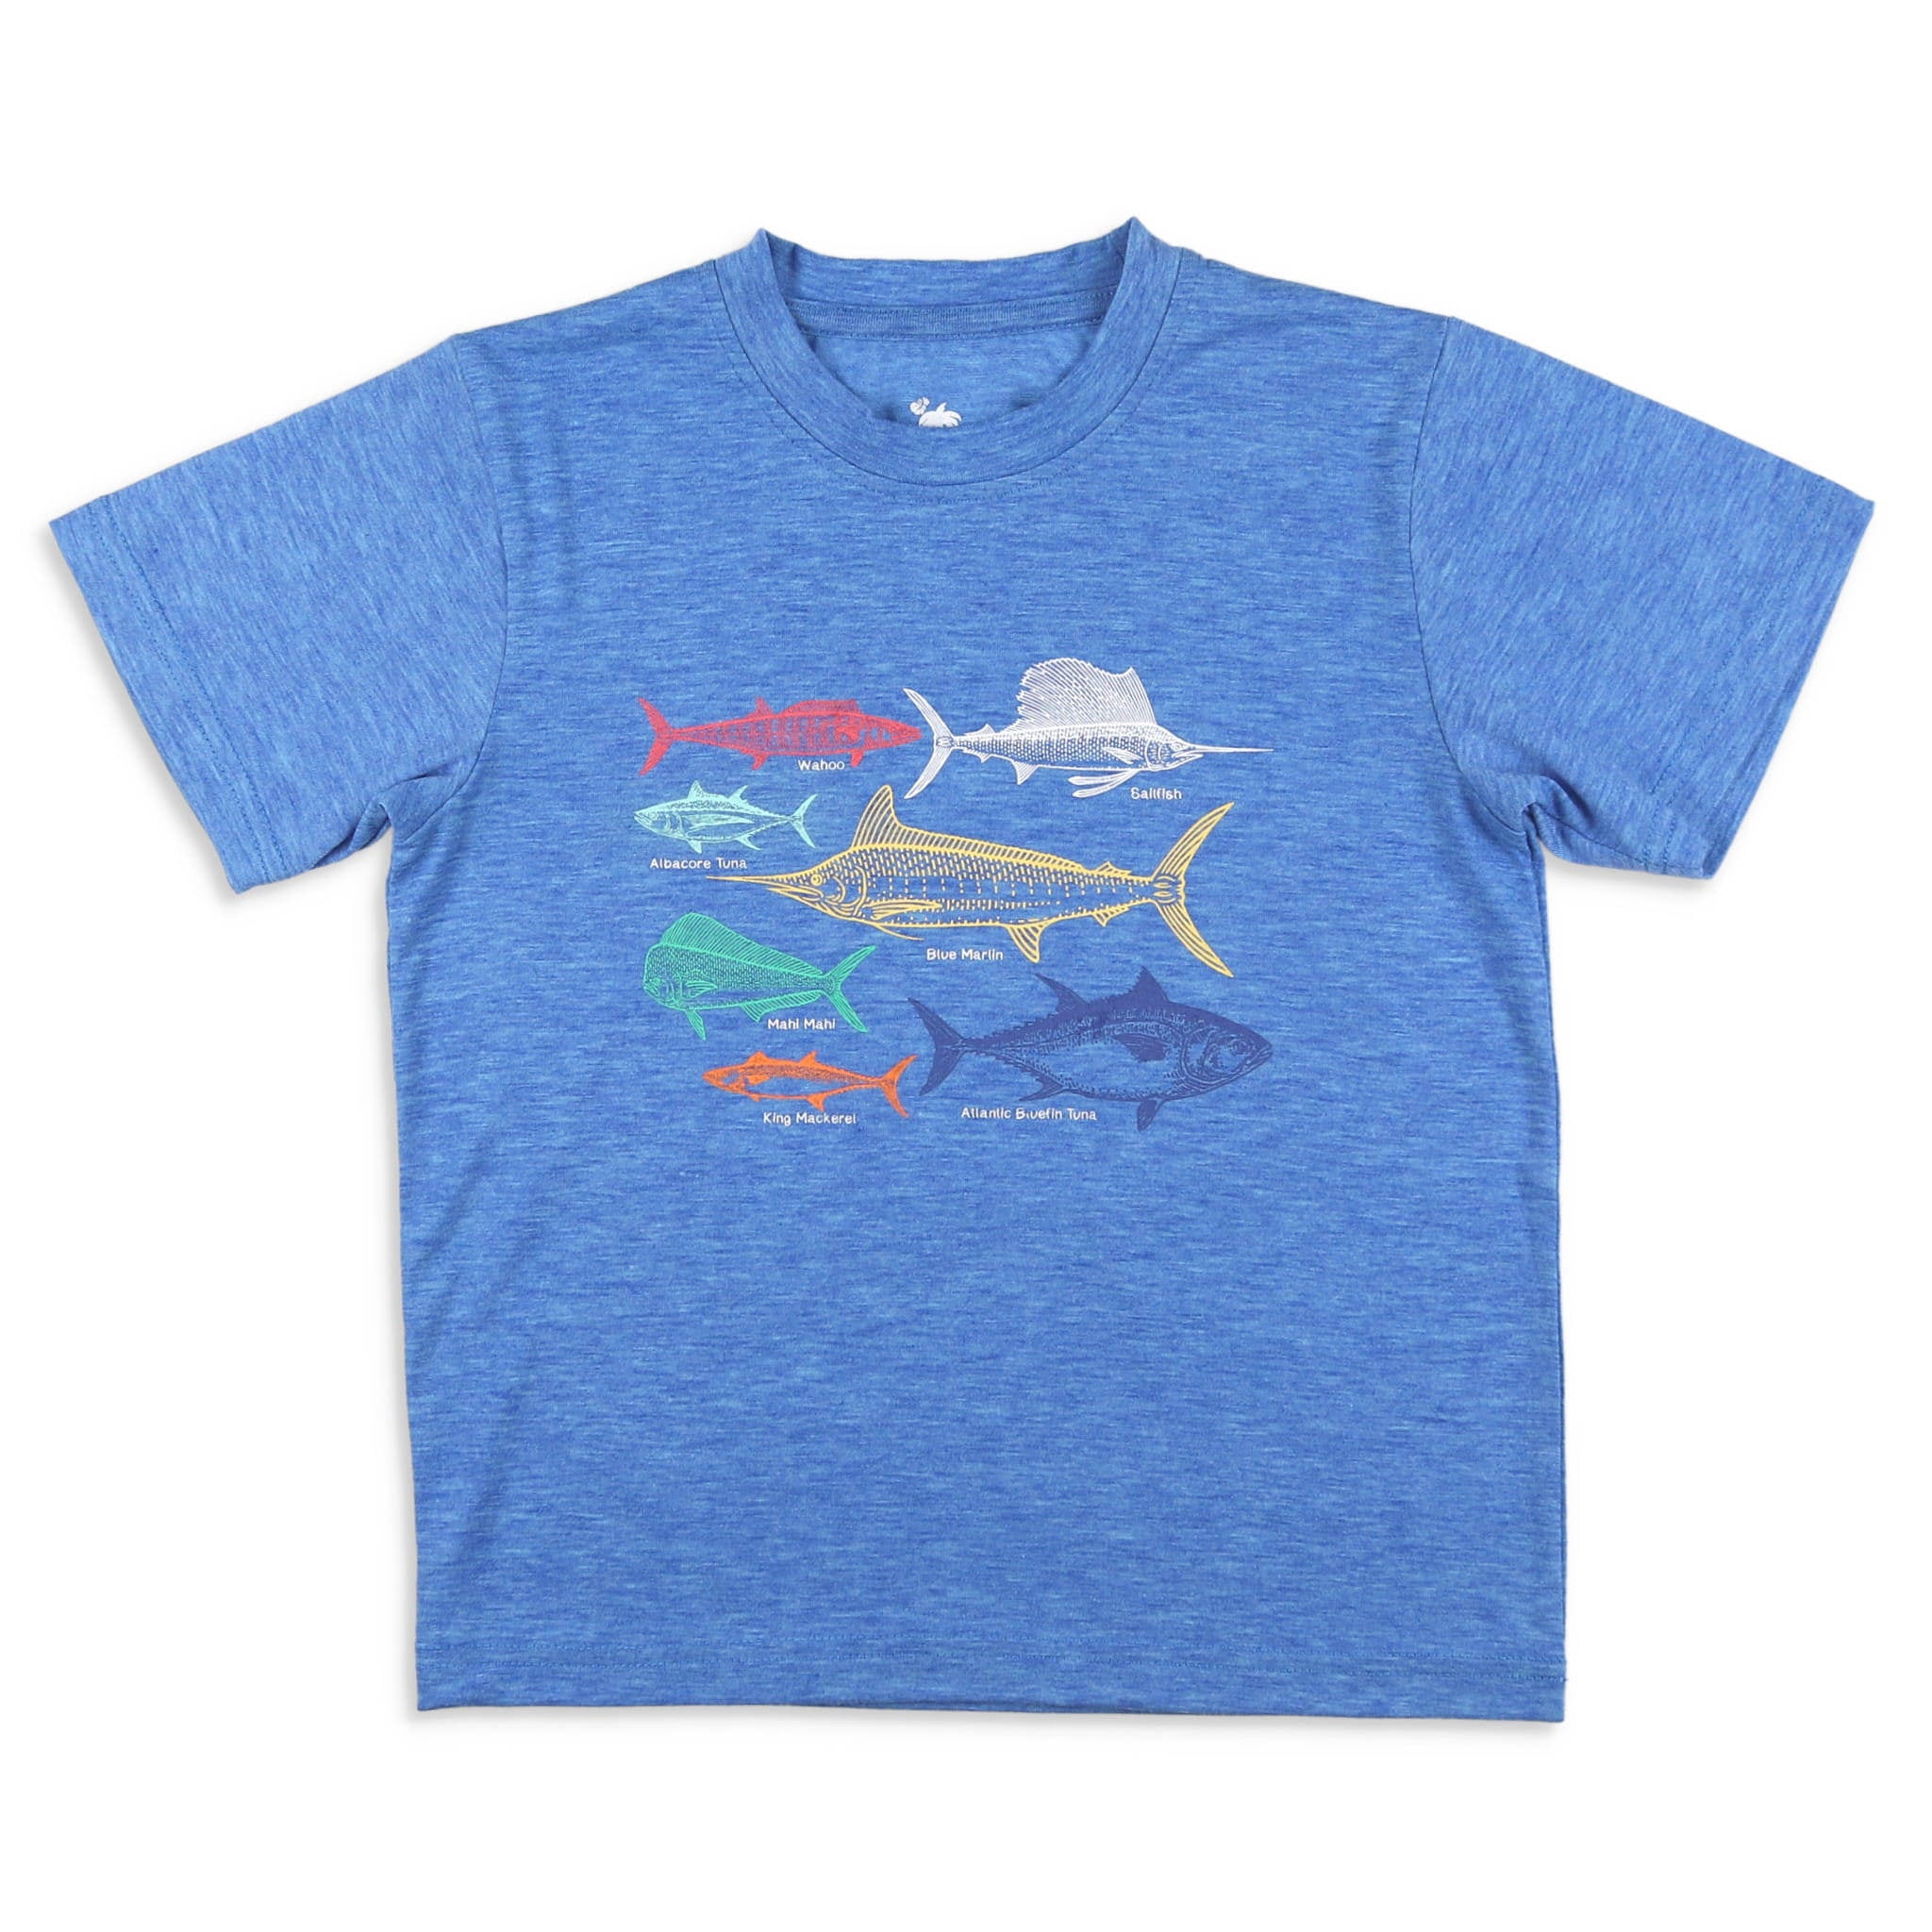 Boys Saltwater Edition Graphic Tee - Shrimp and Grits Kids